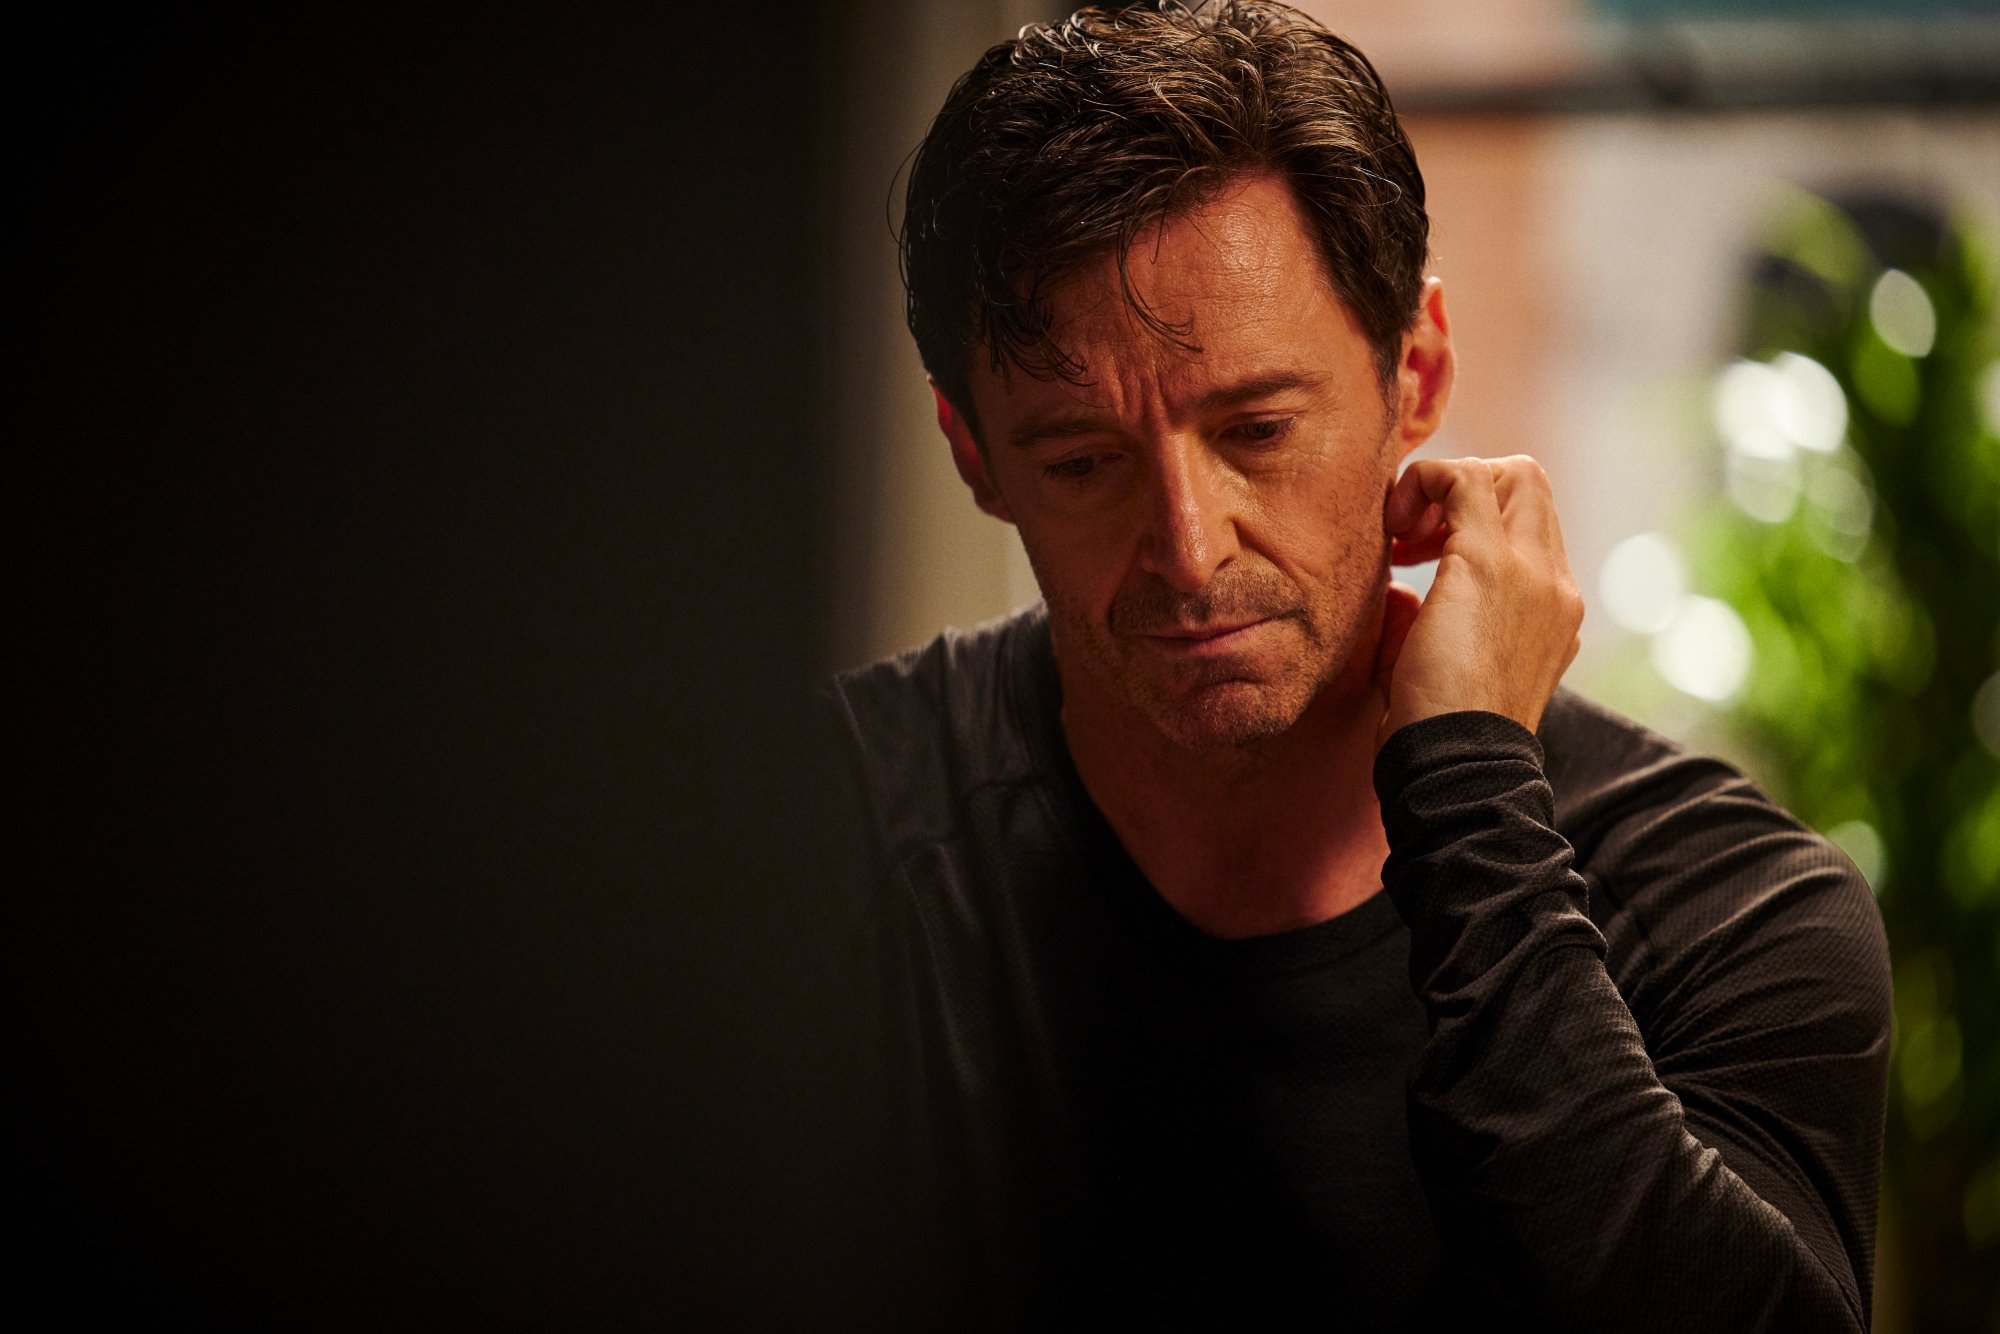 ‘The Son’ Hugh Jackman as Peter looking down with a sad look on his face. He's resting his hand on the back of his neck.